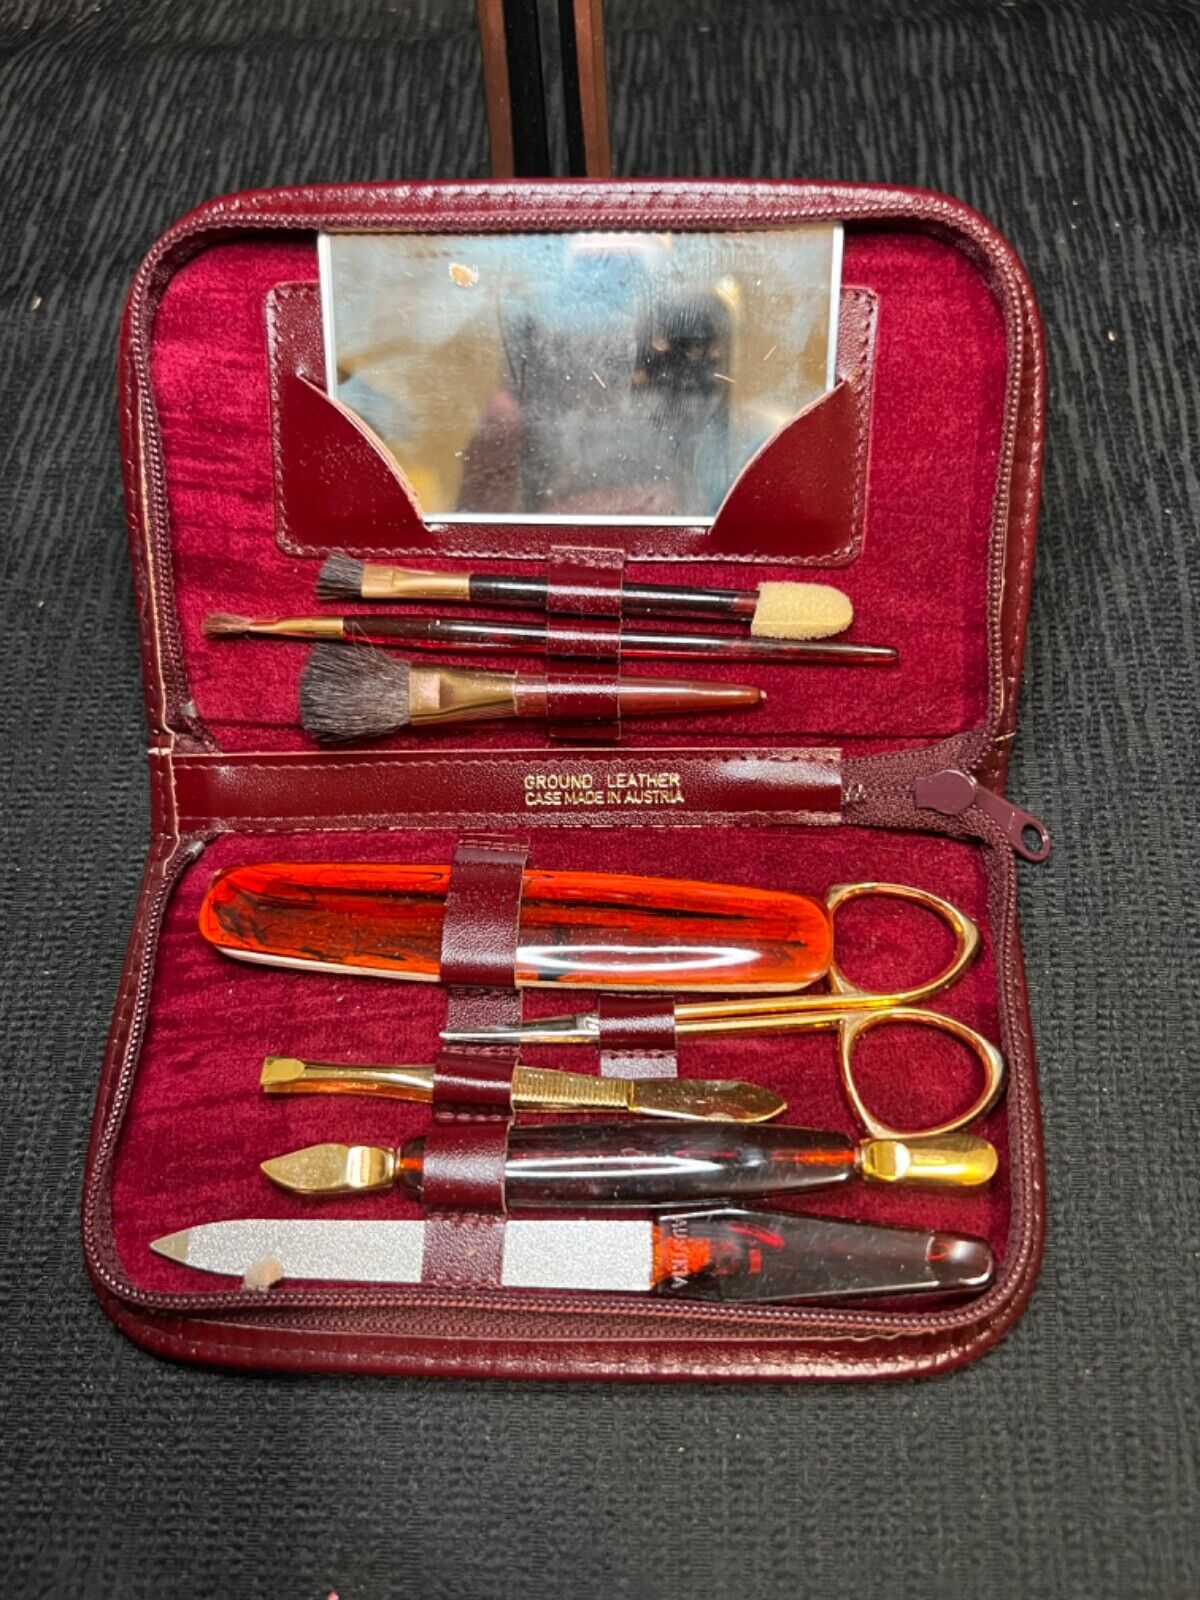 Vintage Manicure Set Brown Leather Case made in Austria, Sperry Company Gift New